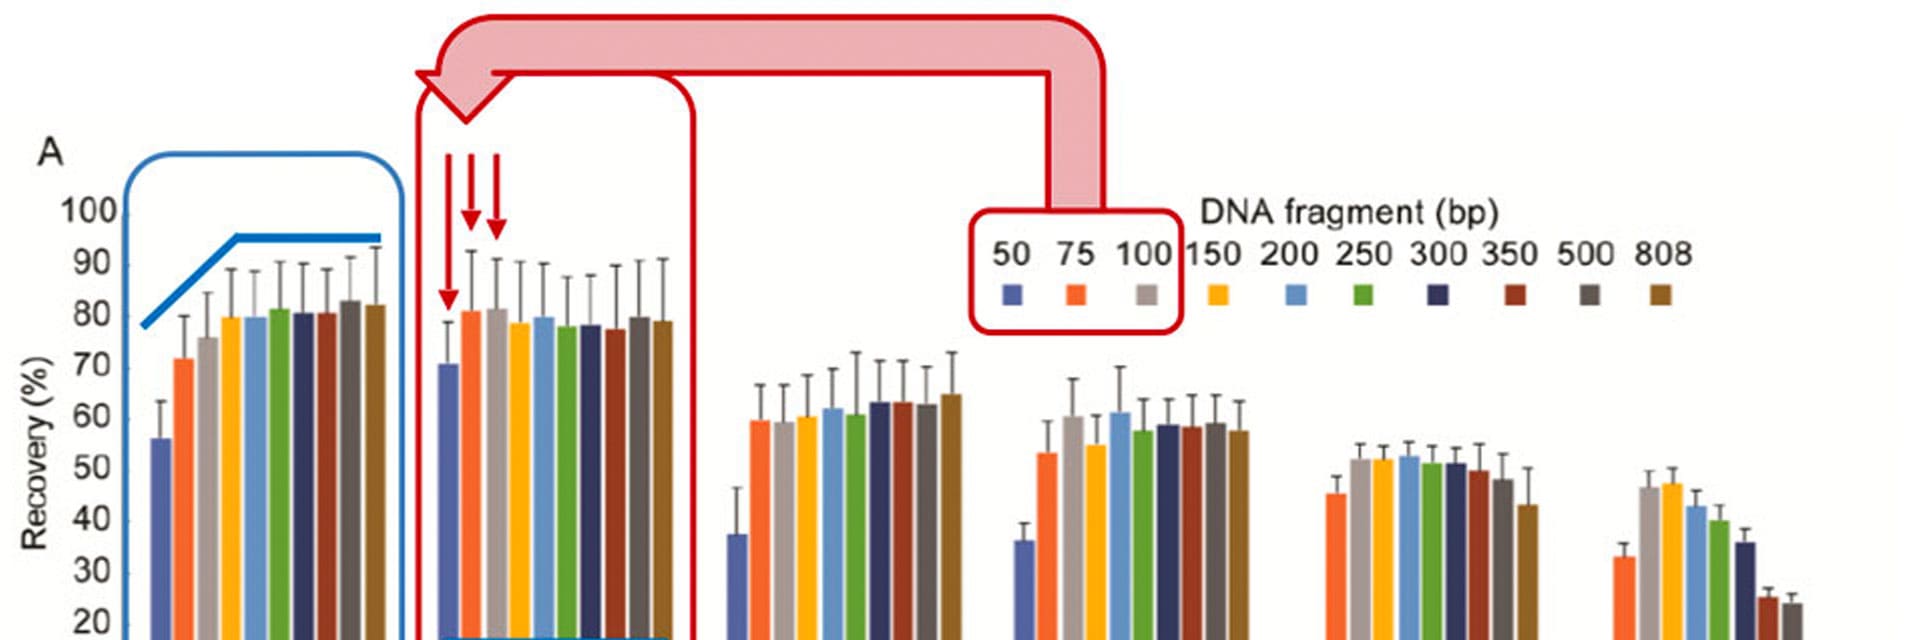 Figure 2. Comparison based on recovery of each individual spiked-in DNA fragment